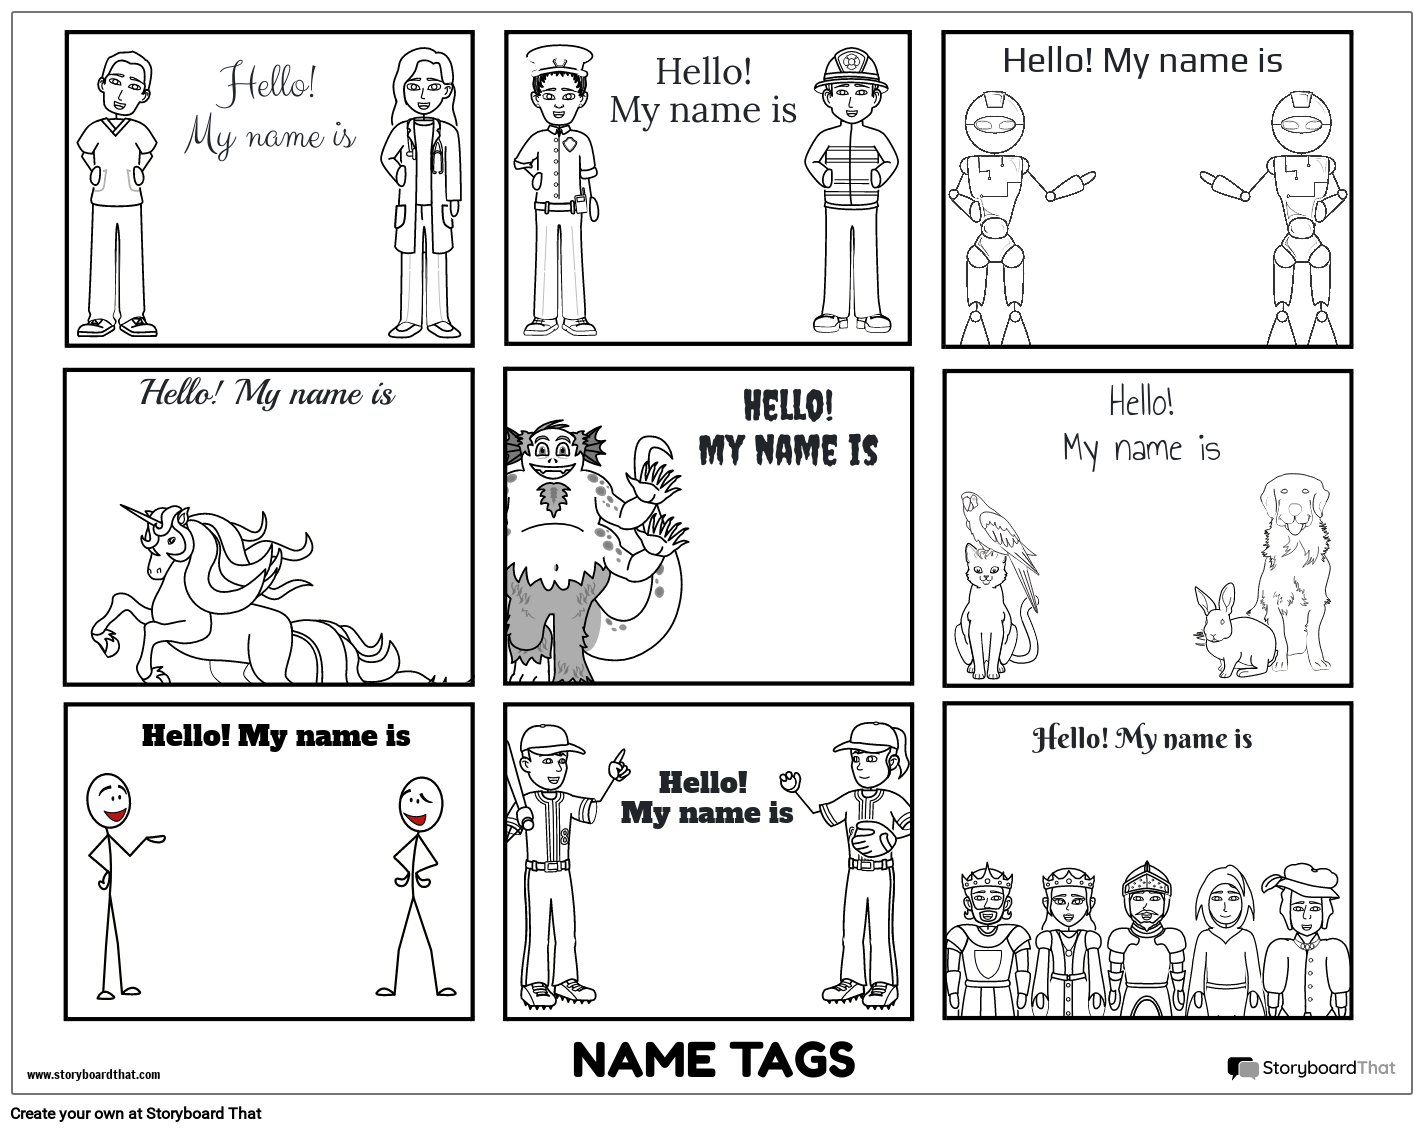 new-create-page-name-tag-template-3-black-white